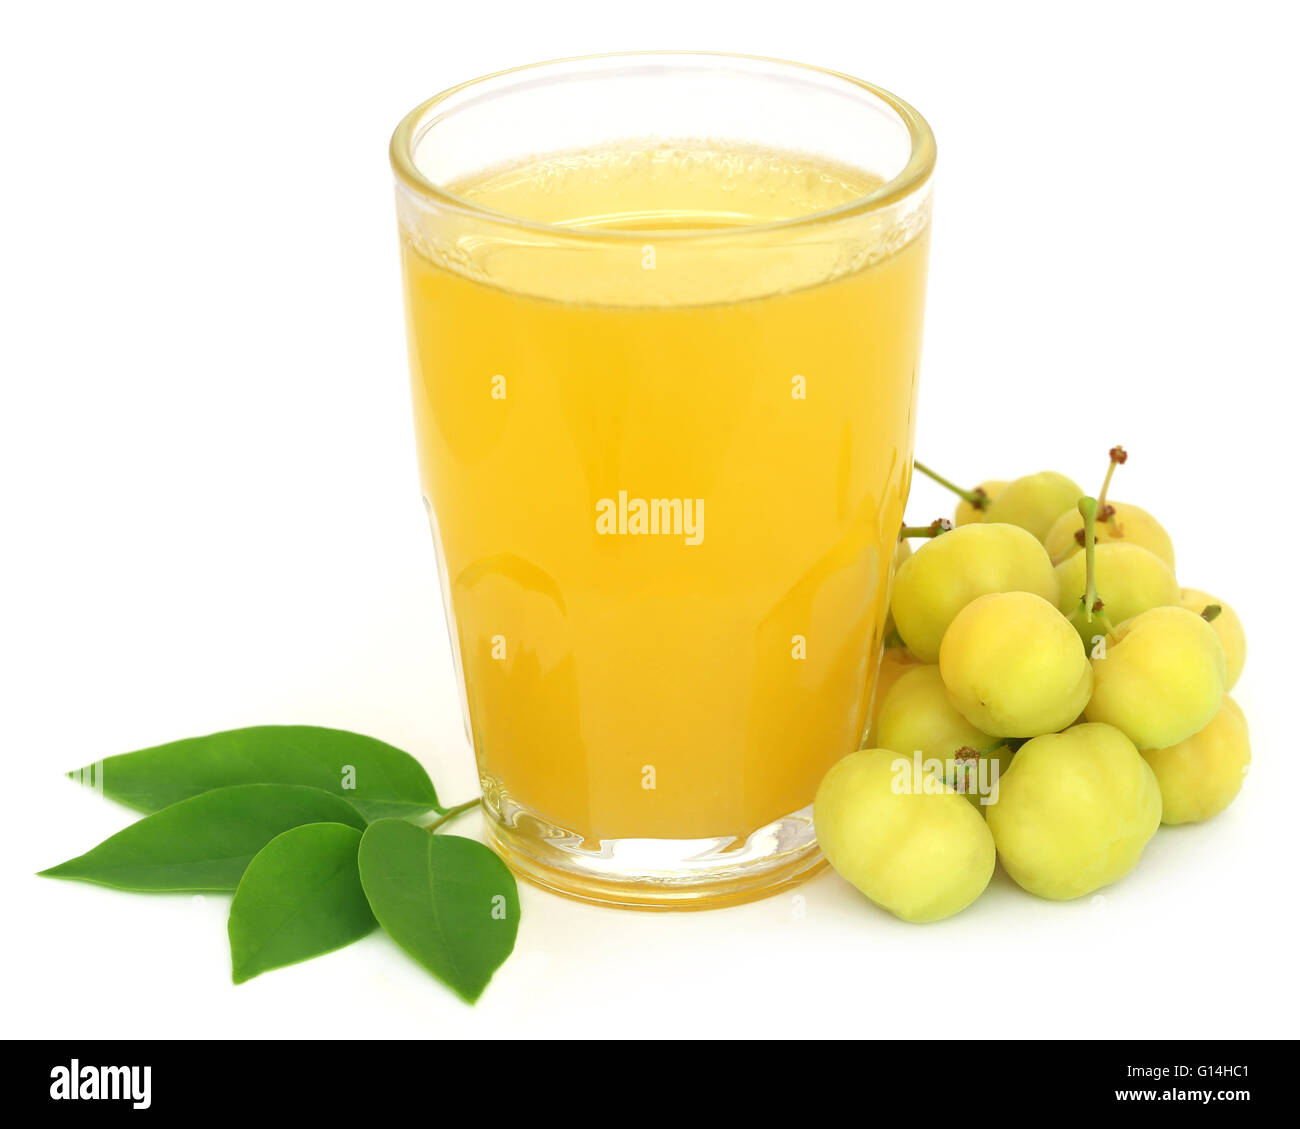 Phyllanthus acidus or Star gooseberry with juice in a glass Stock Photo